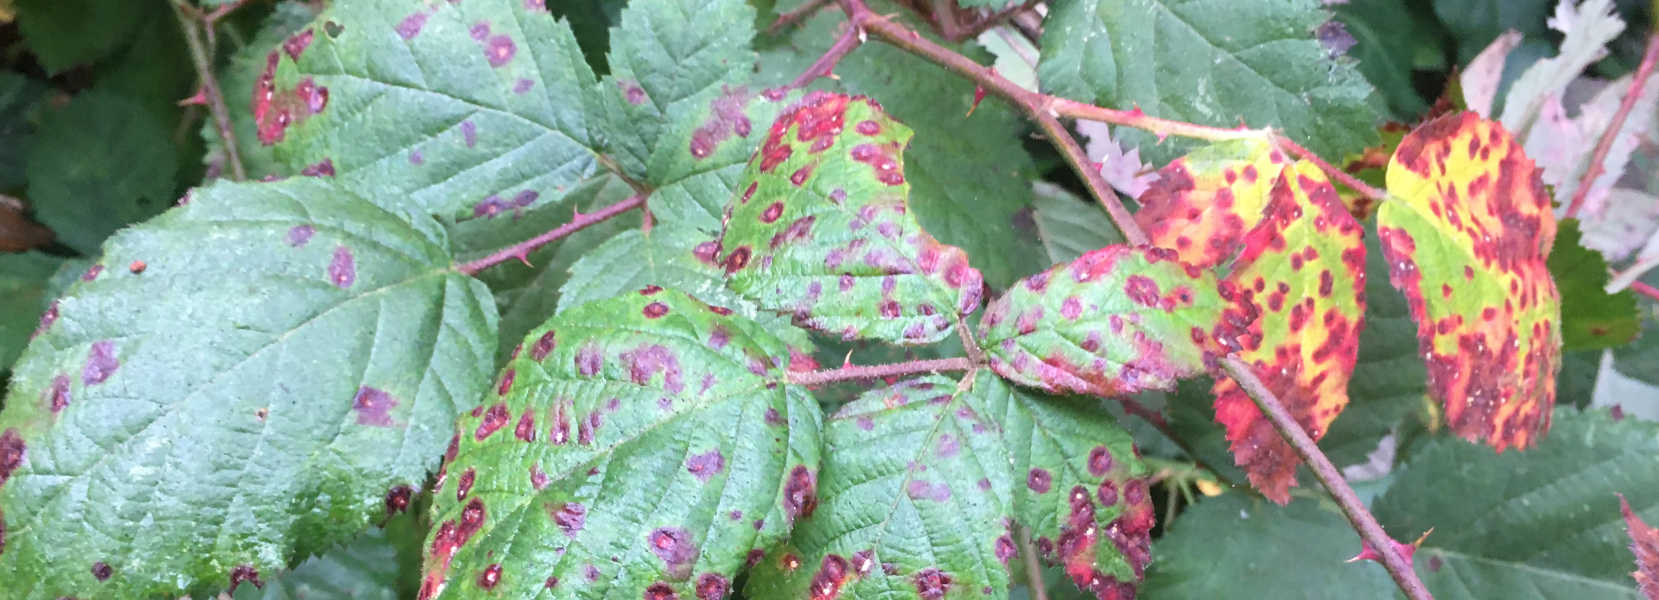 Photo of blackberry leaves turning red and splotchy . Own work 2020.